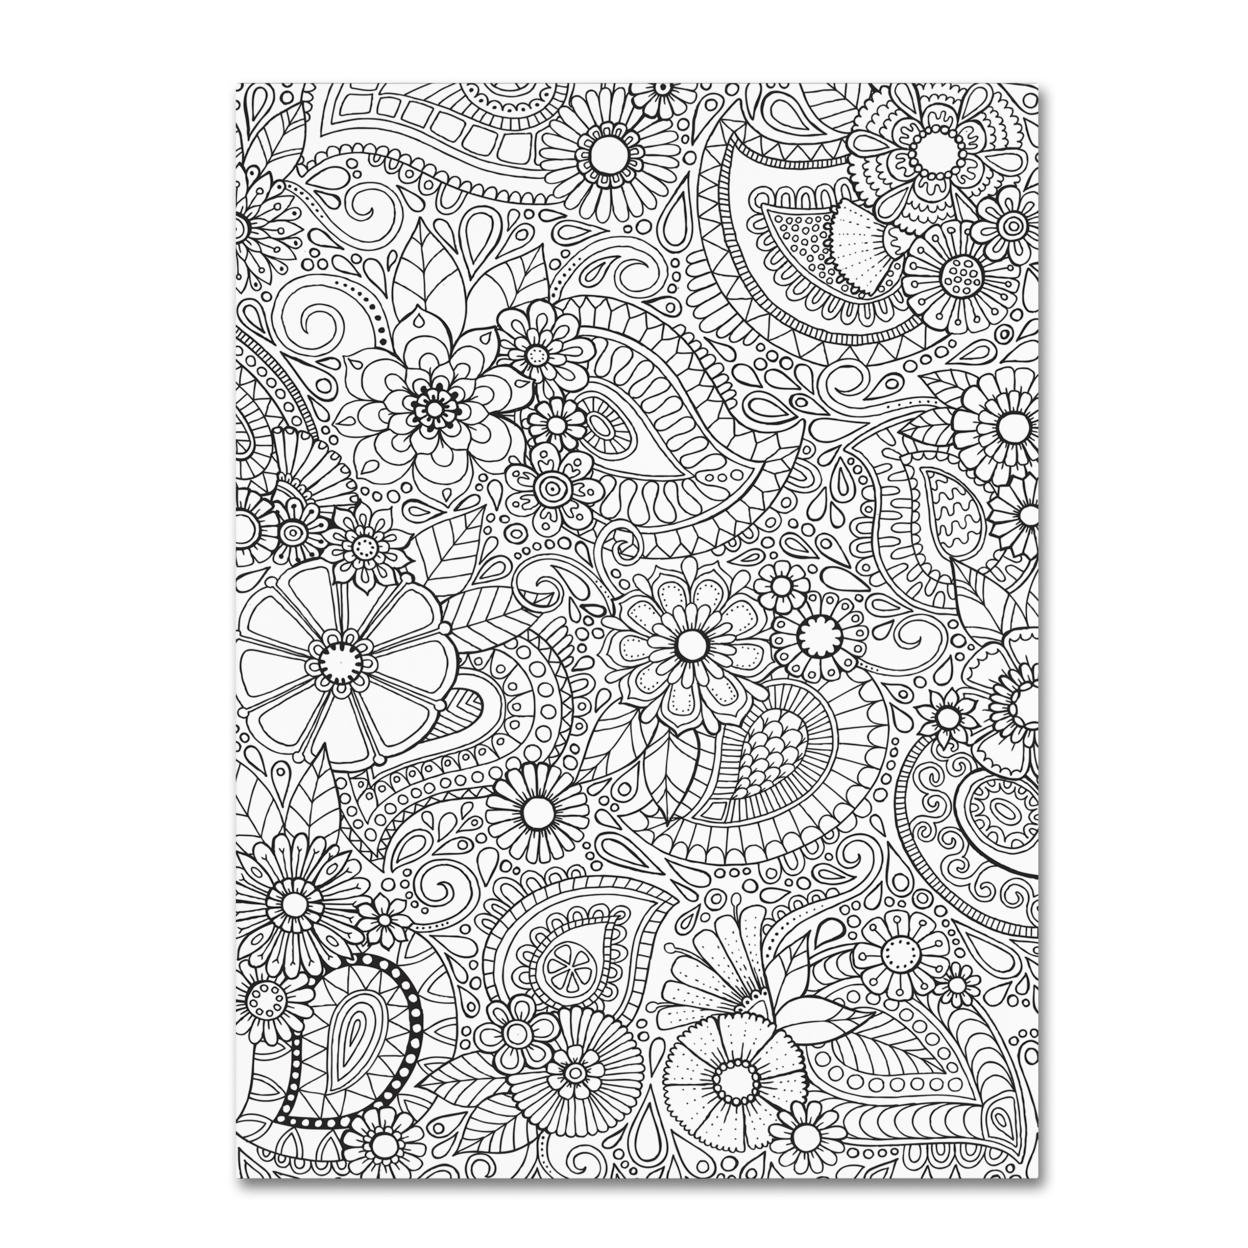 Hello Angel 'Paisley Blooms' Canvas Wall Art 35 X 47 Inches